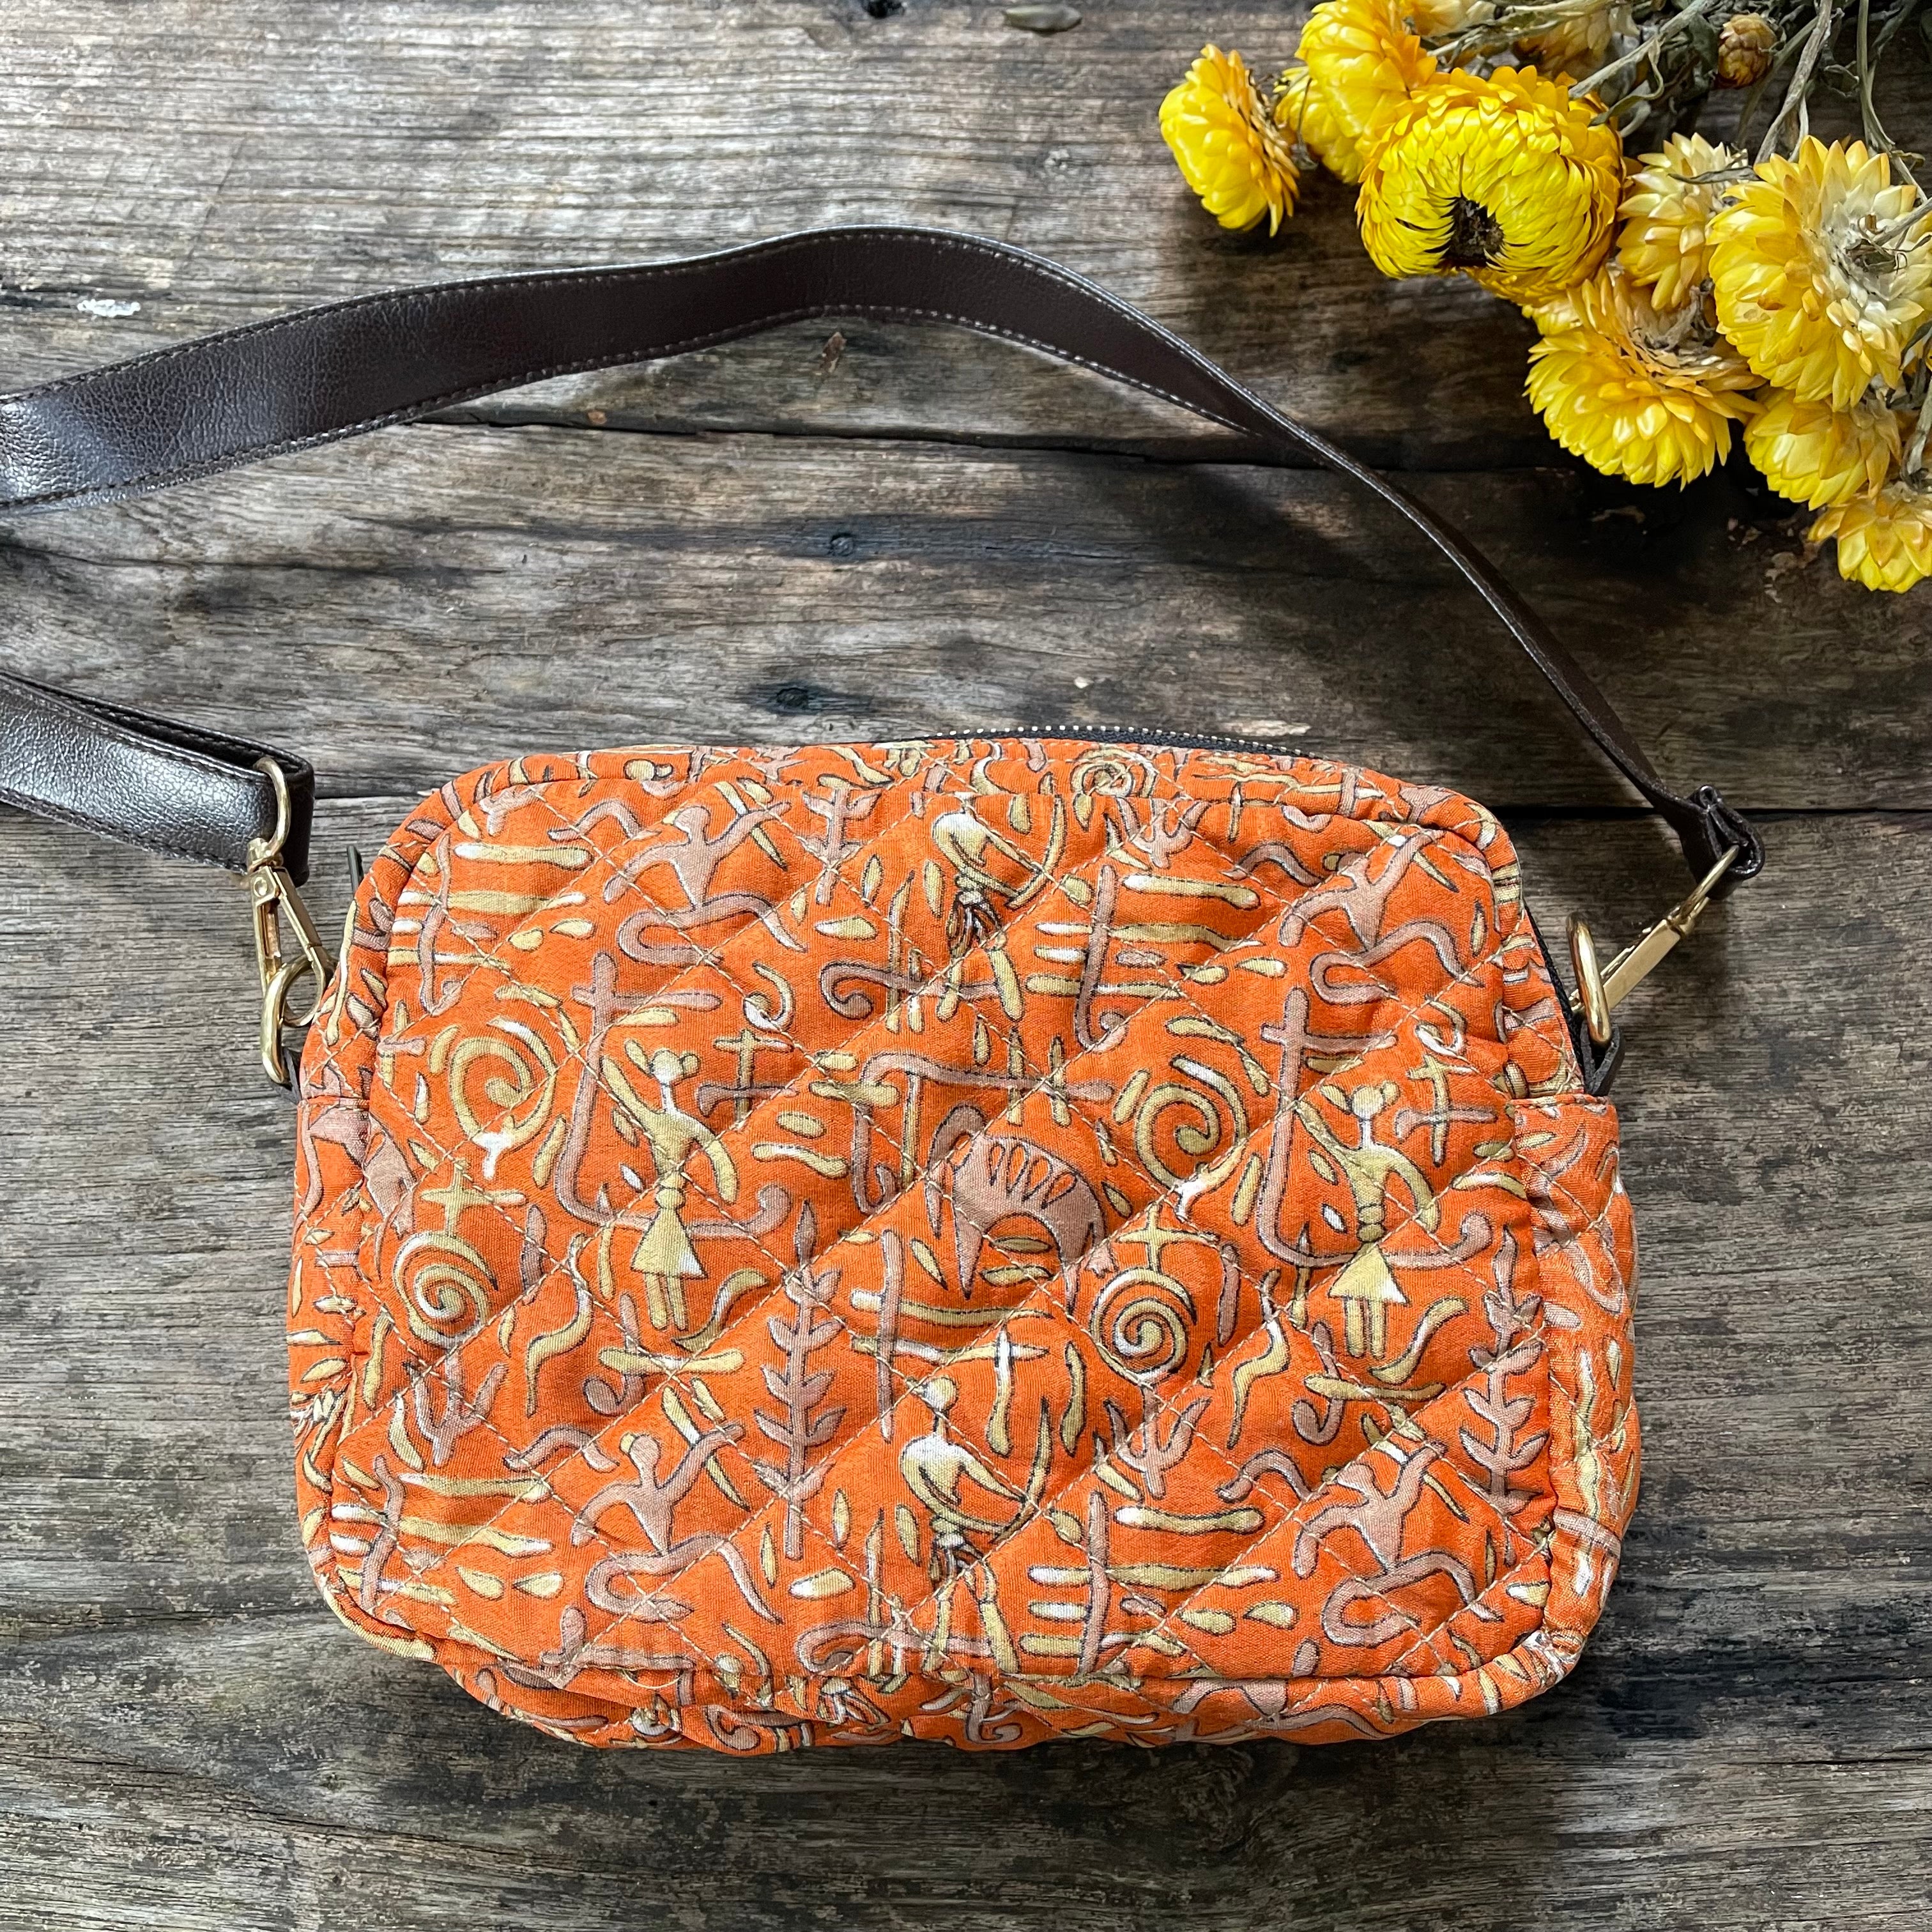 Quilted Sari Side Bag